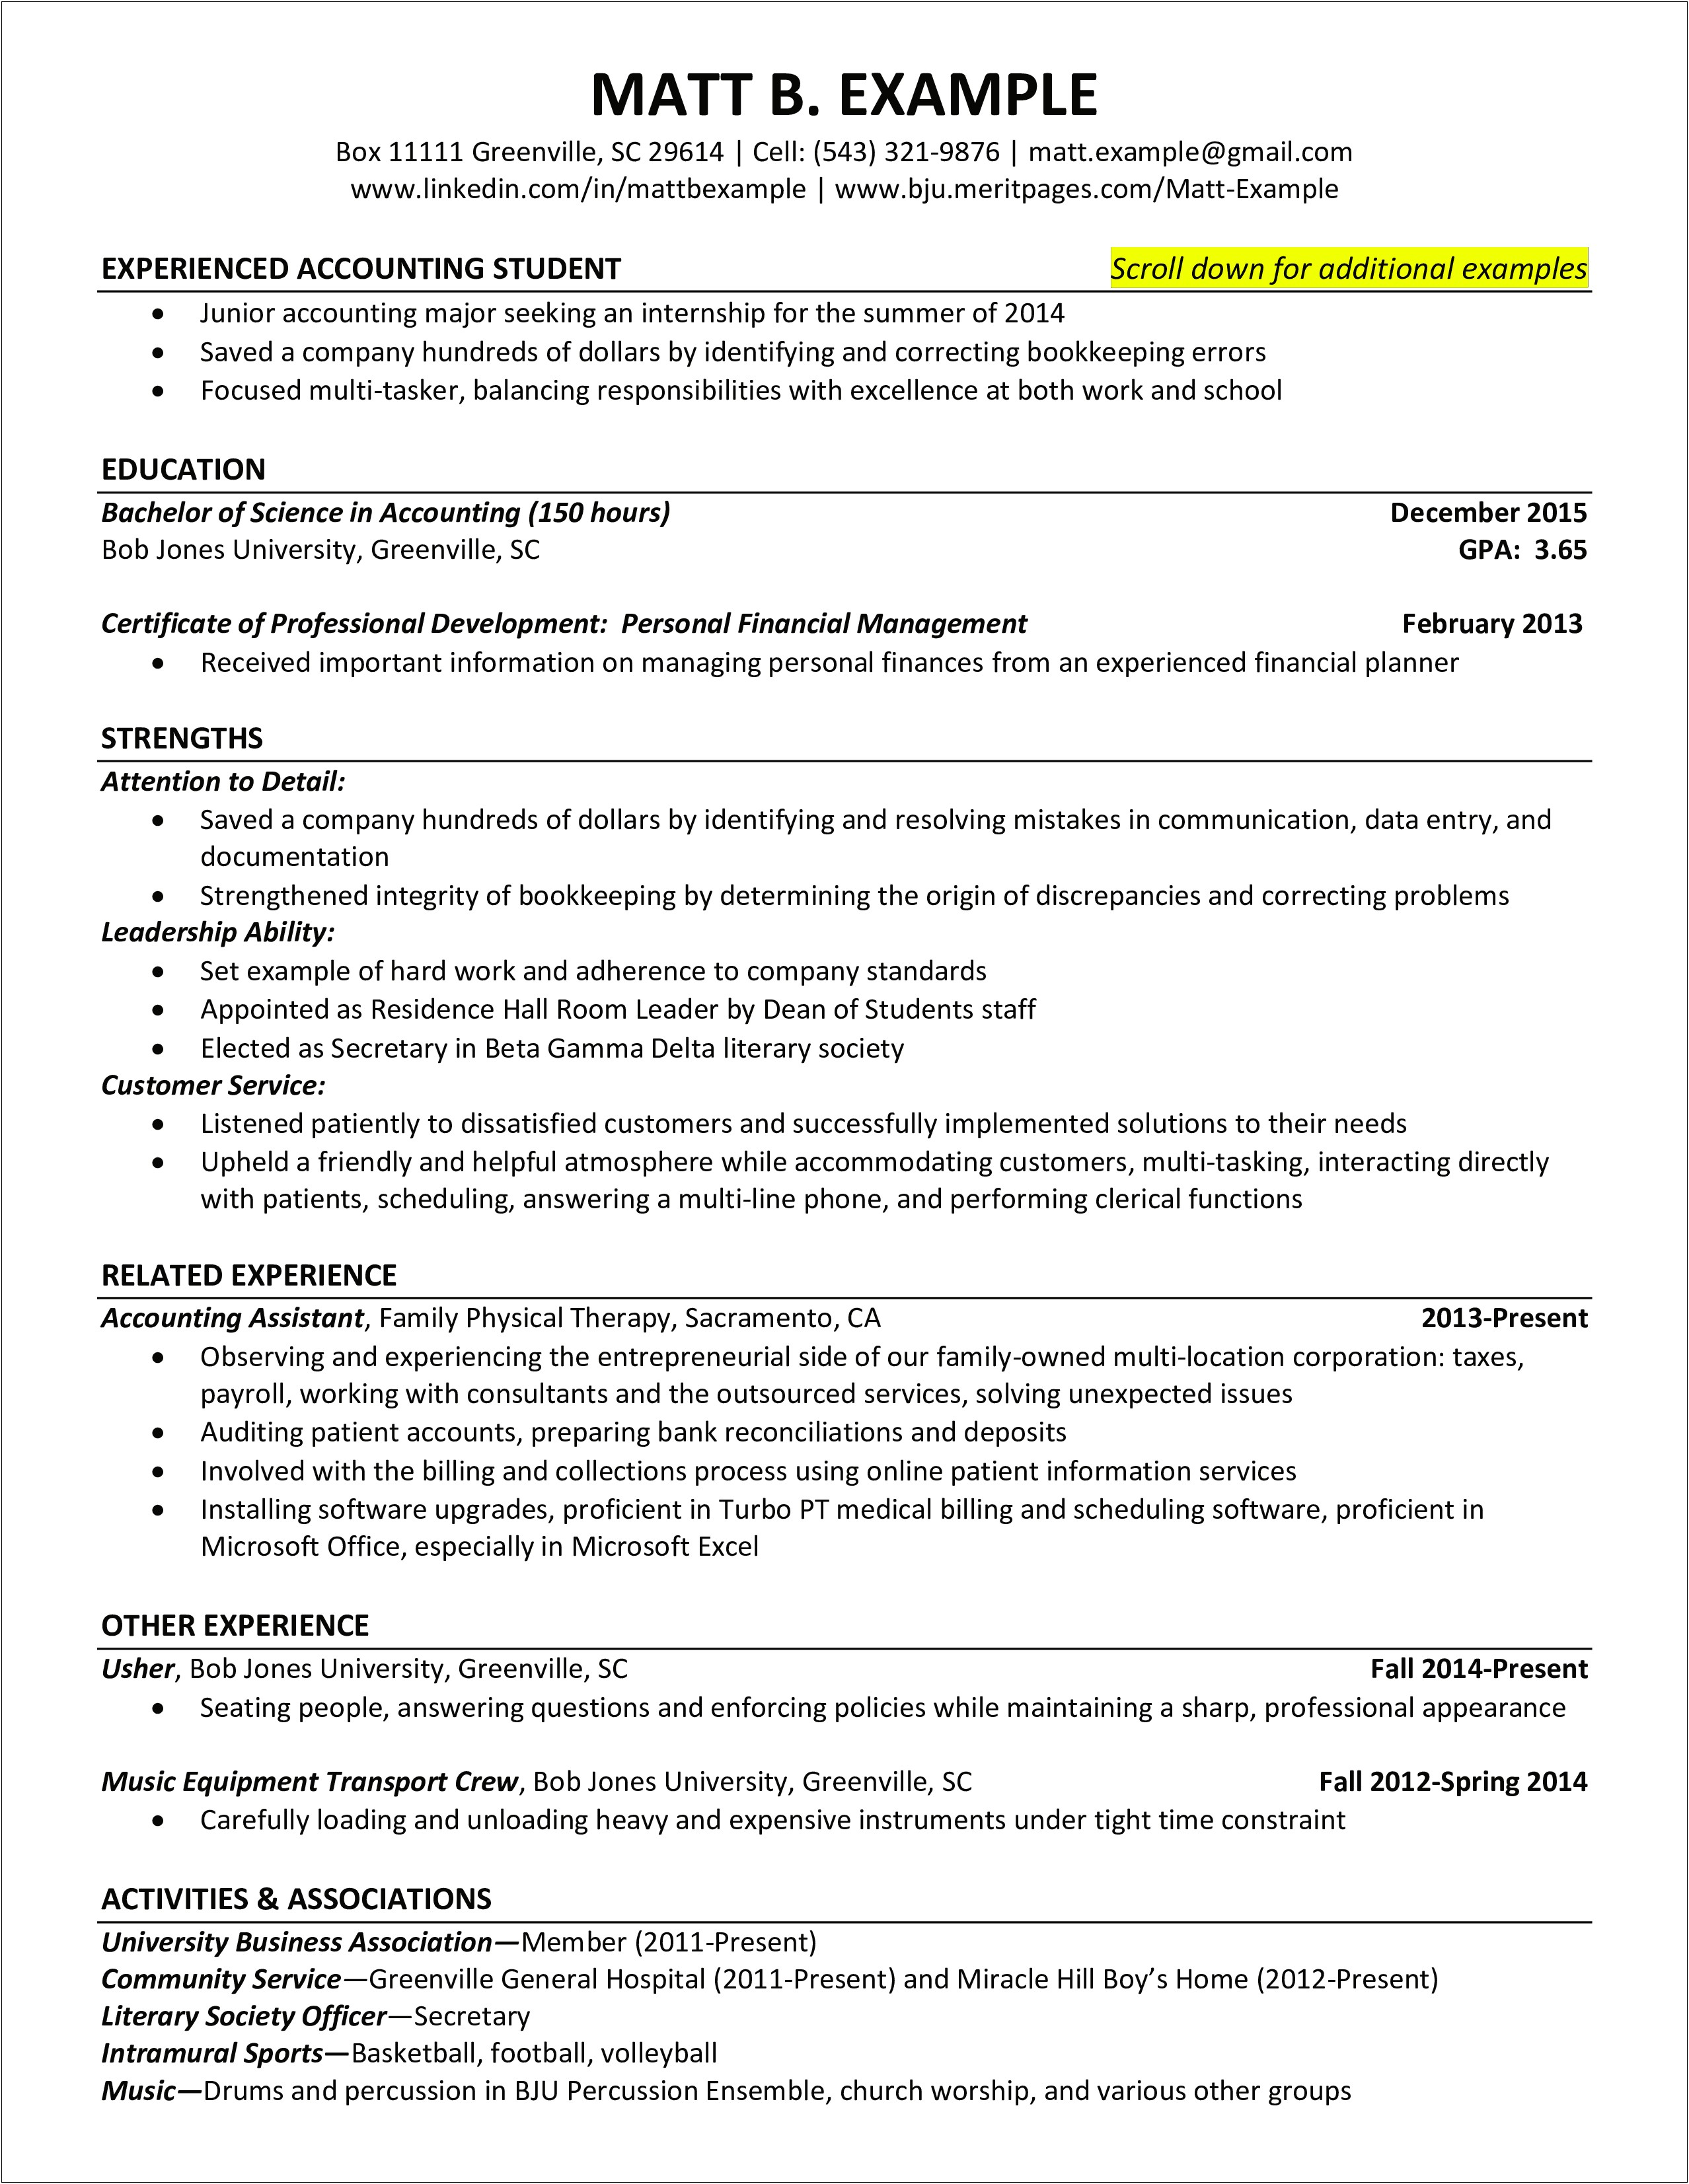 Is Gpa Important In Resume Experience